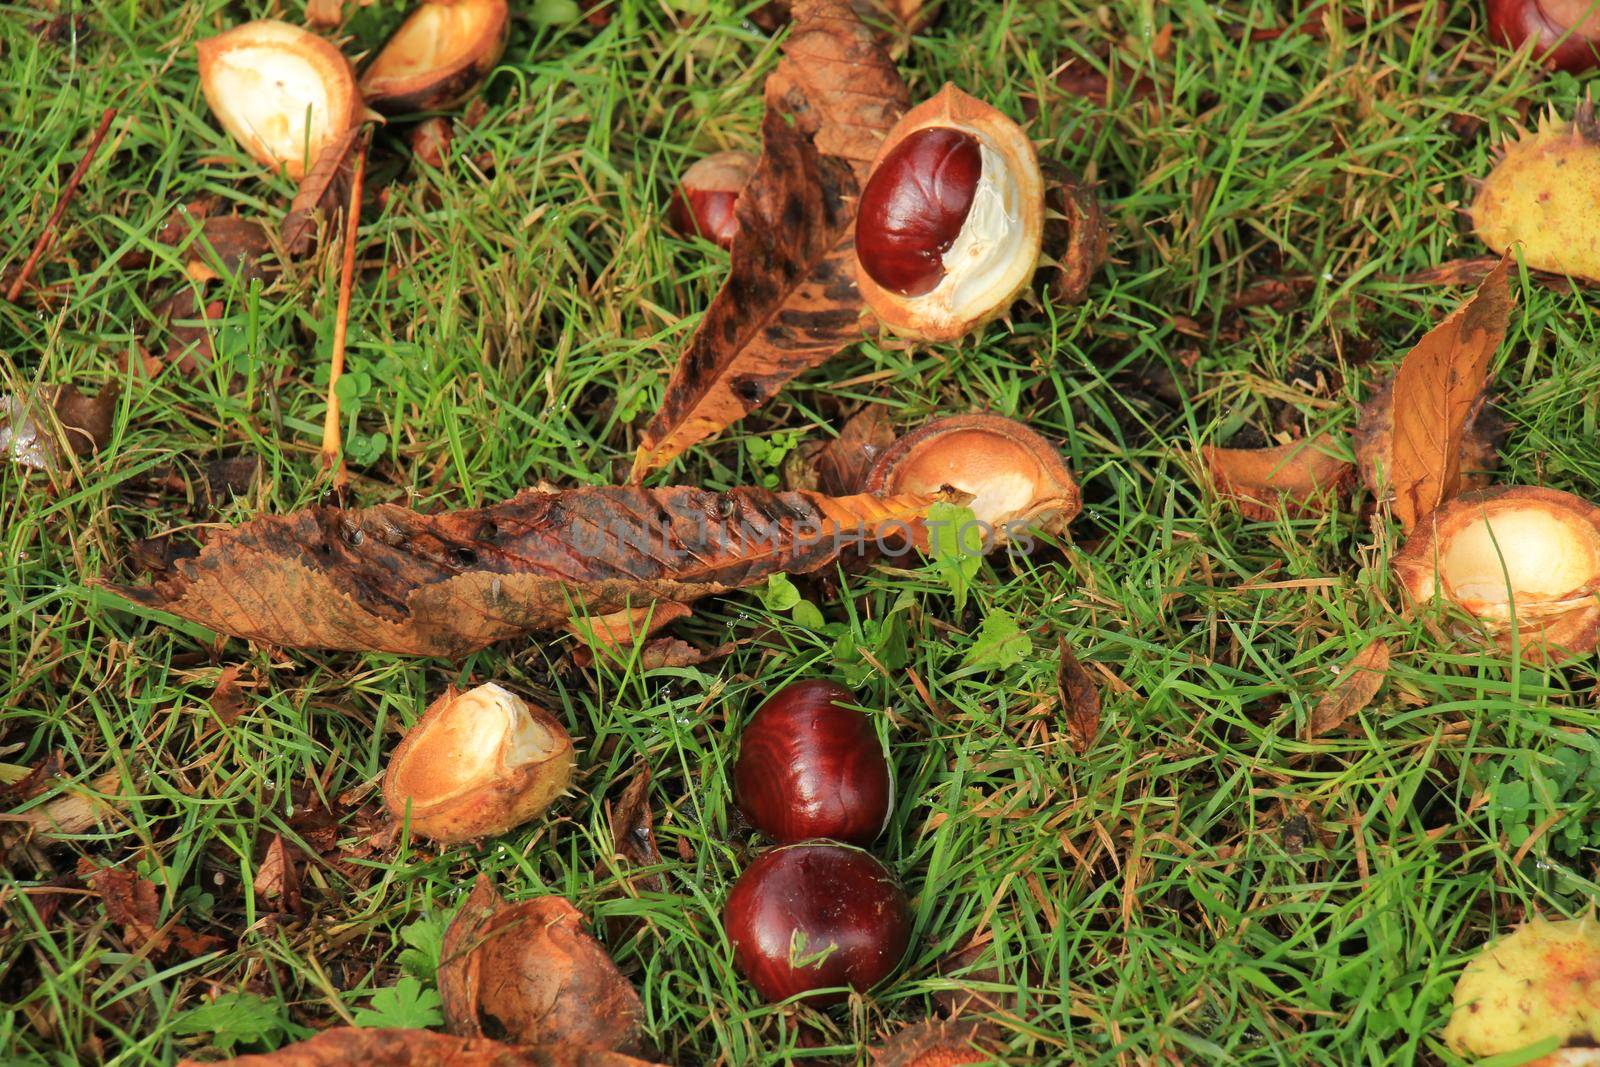 Chestnuts the grass in an autumn forest by studioportosabbia